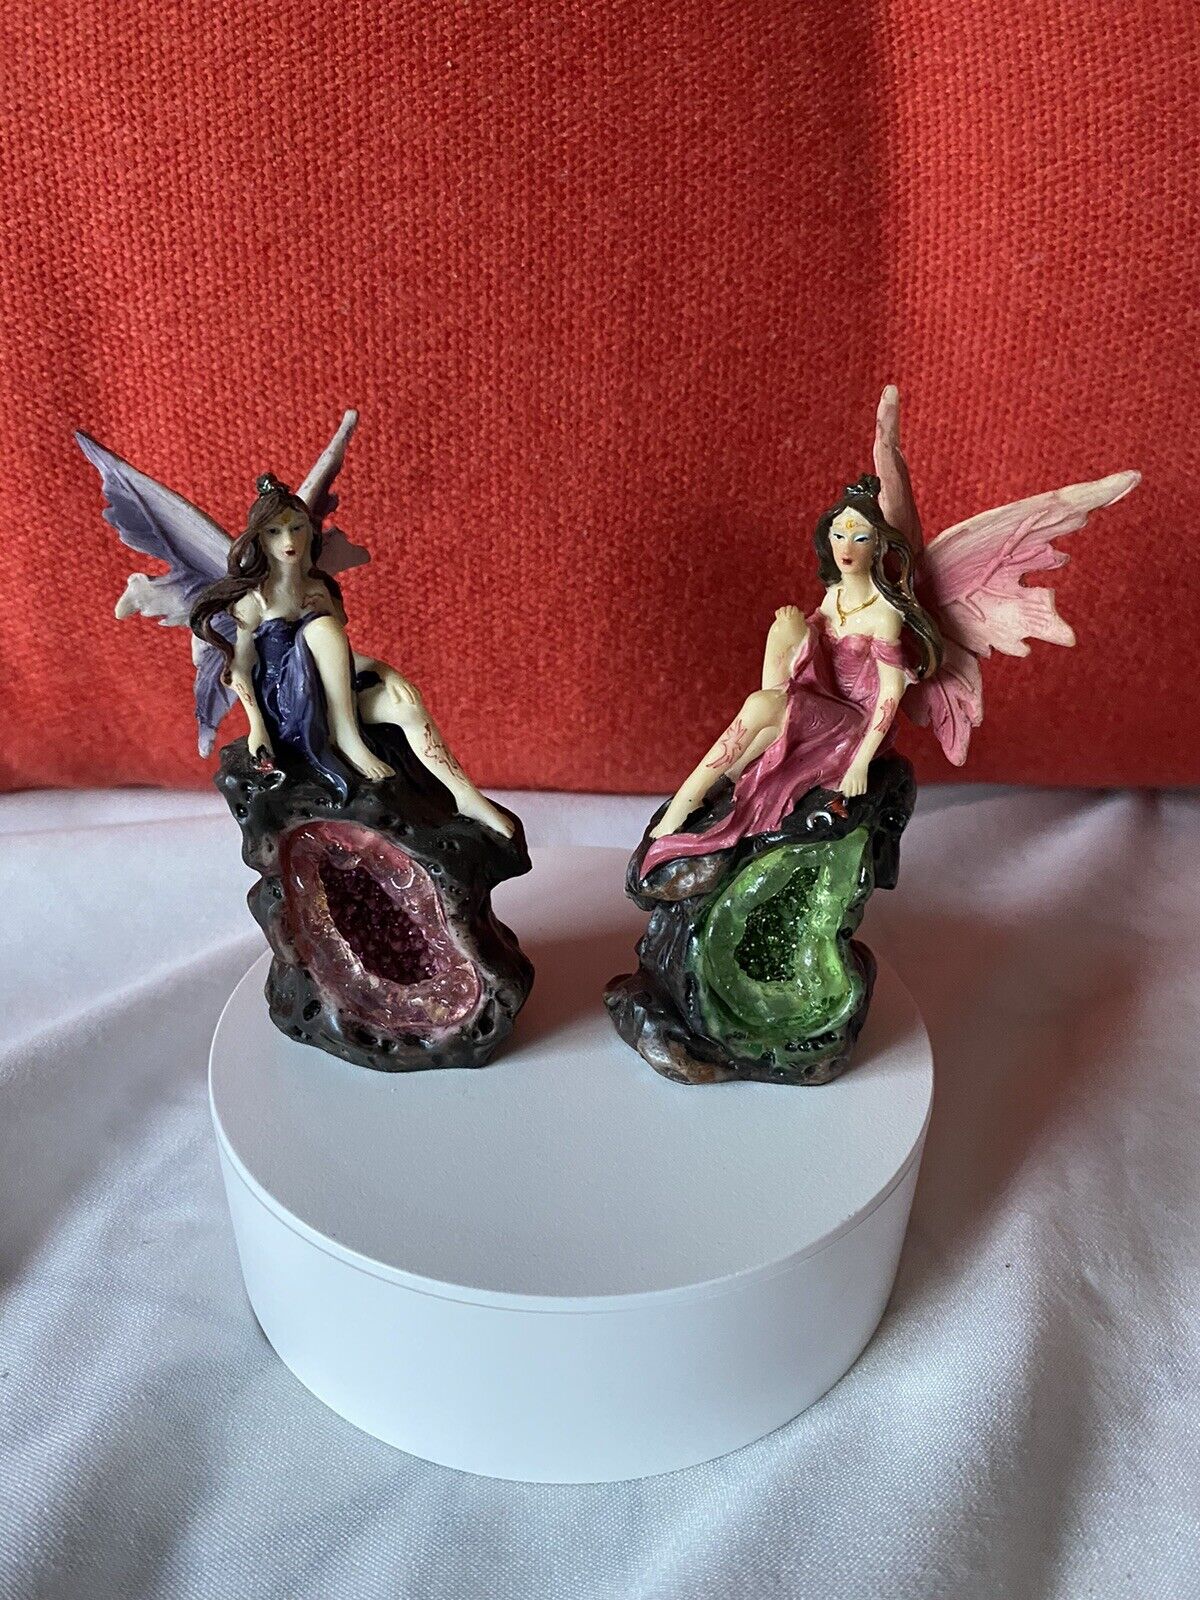 Lot of  2: Resin Pink Winged &Purple Winged Fairy Figures Each Sit on Geode. VGC